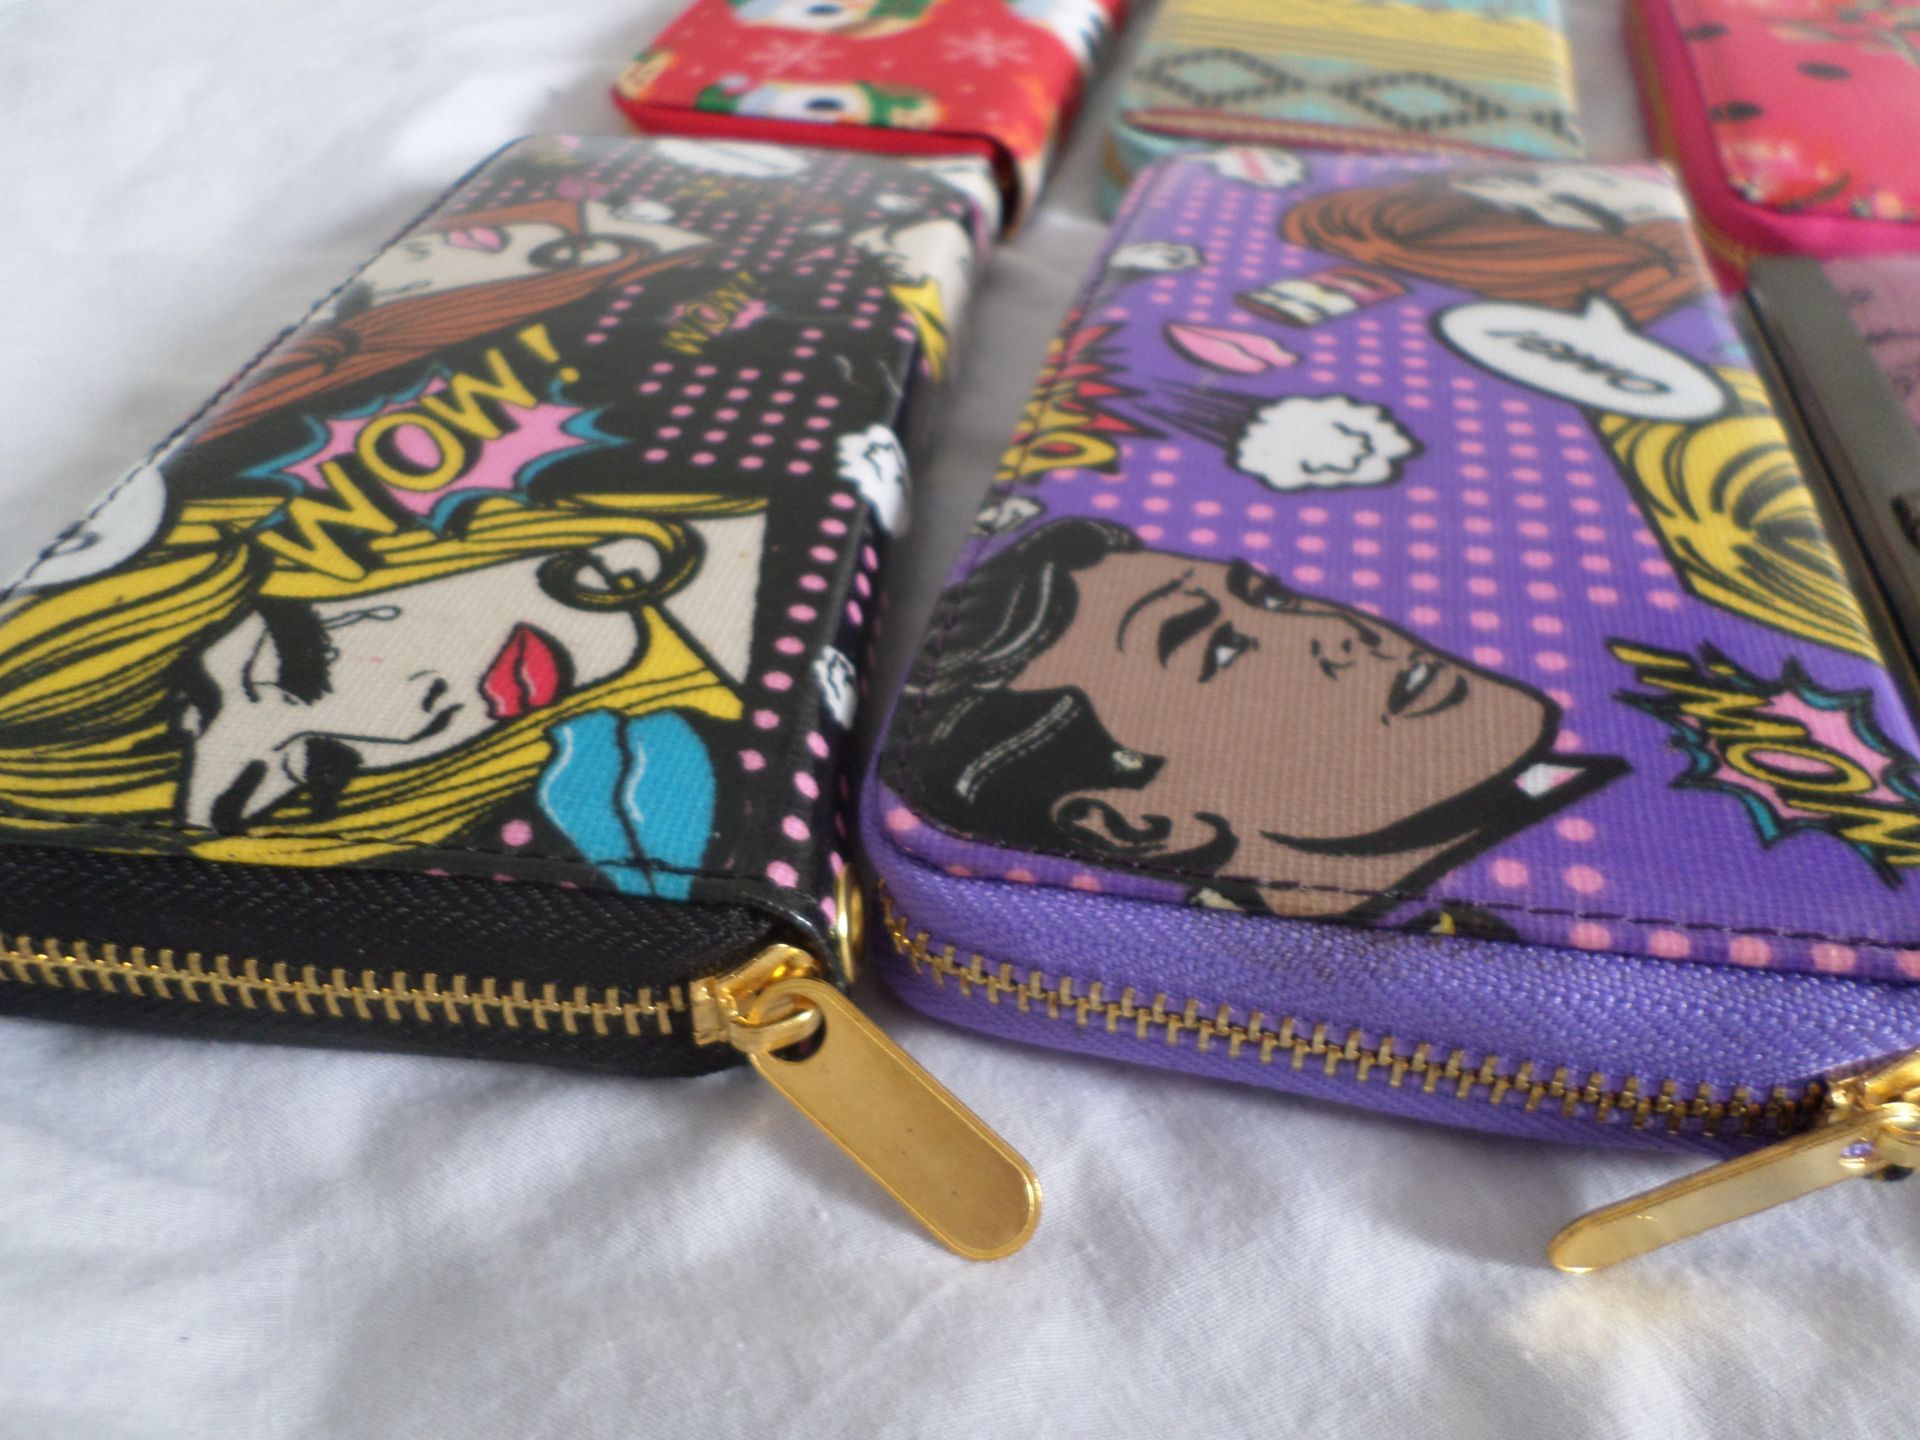 100 x Ladies Clutch/Purses RRP £14 Each. Brand New - Image 4 of 4